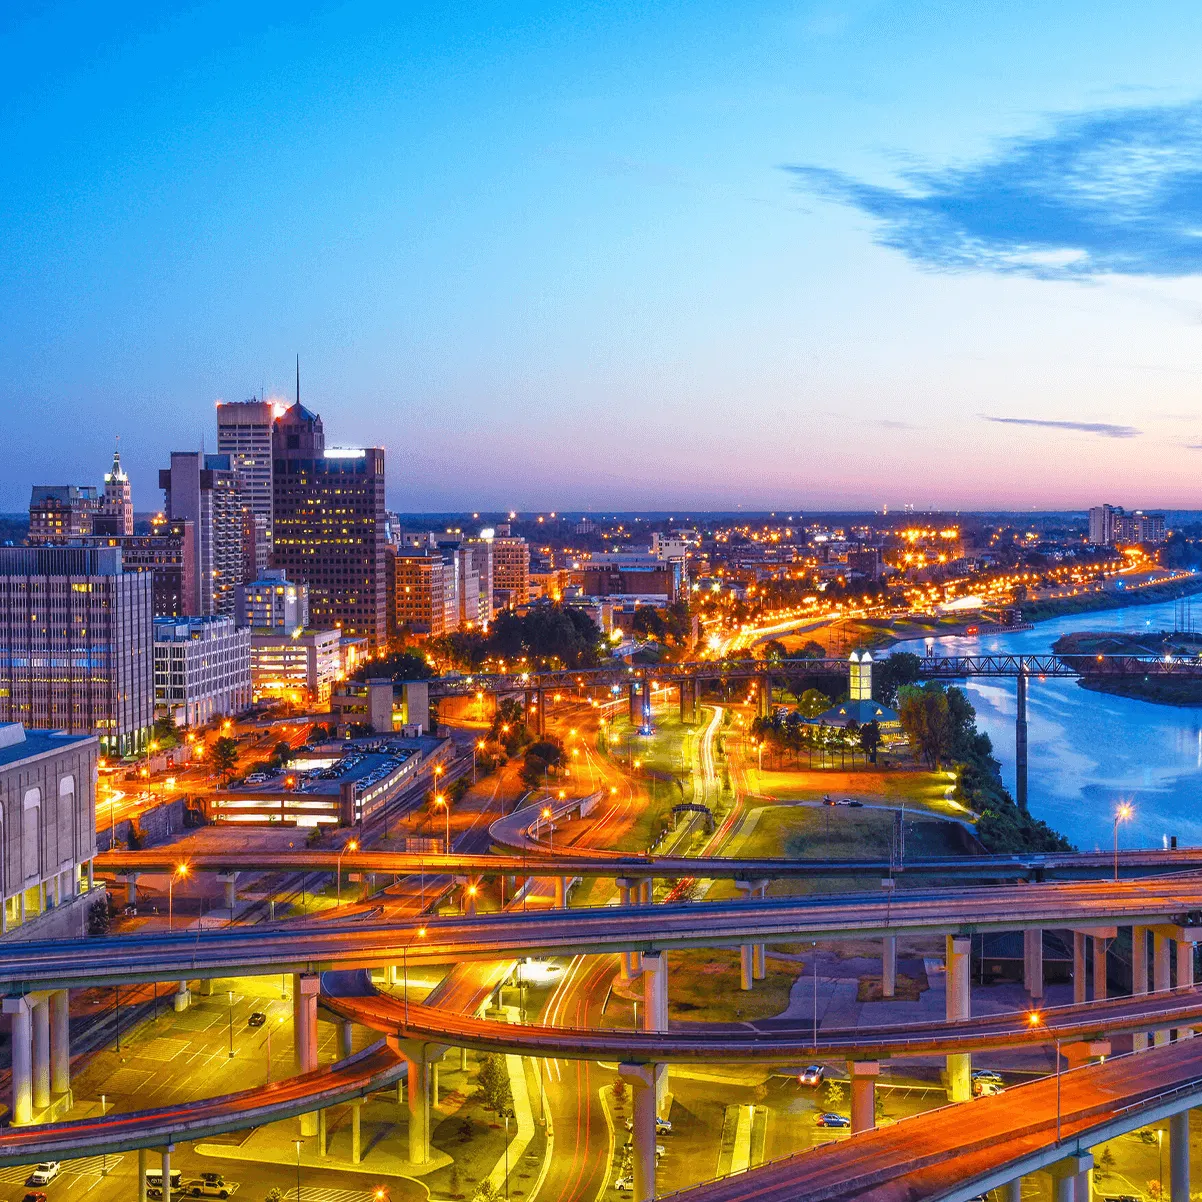 A cityscape of Memphis, Tennessee at dusk, showcasing illuminated buildings, highways, and the Mississippi River.